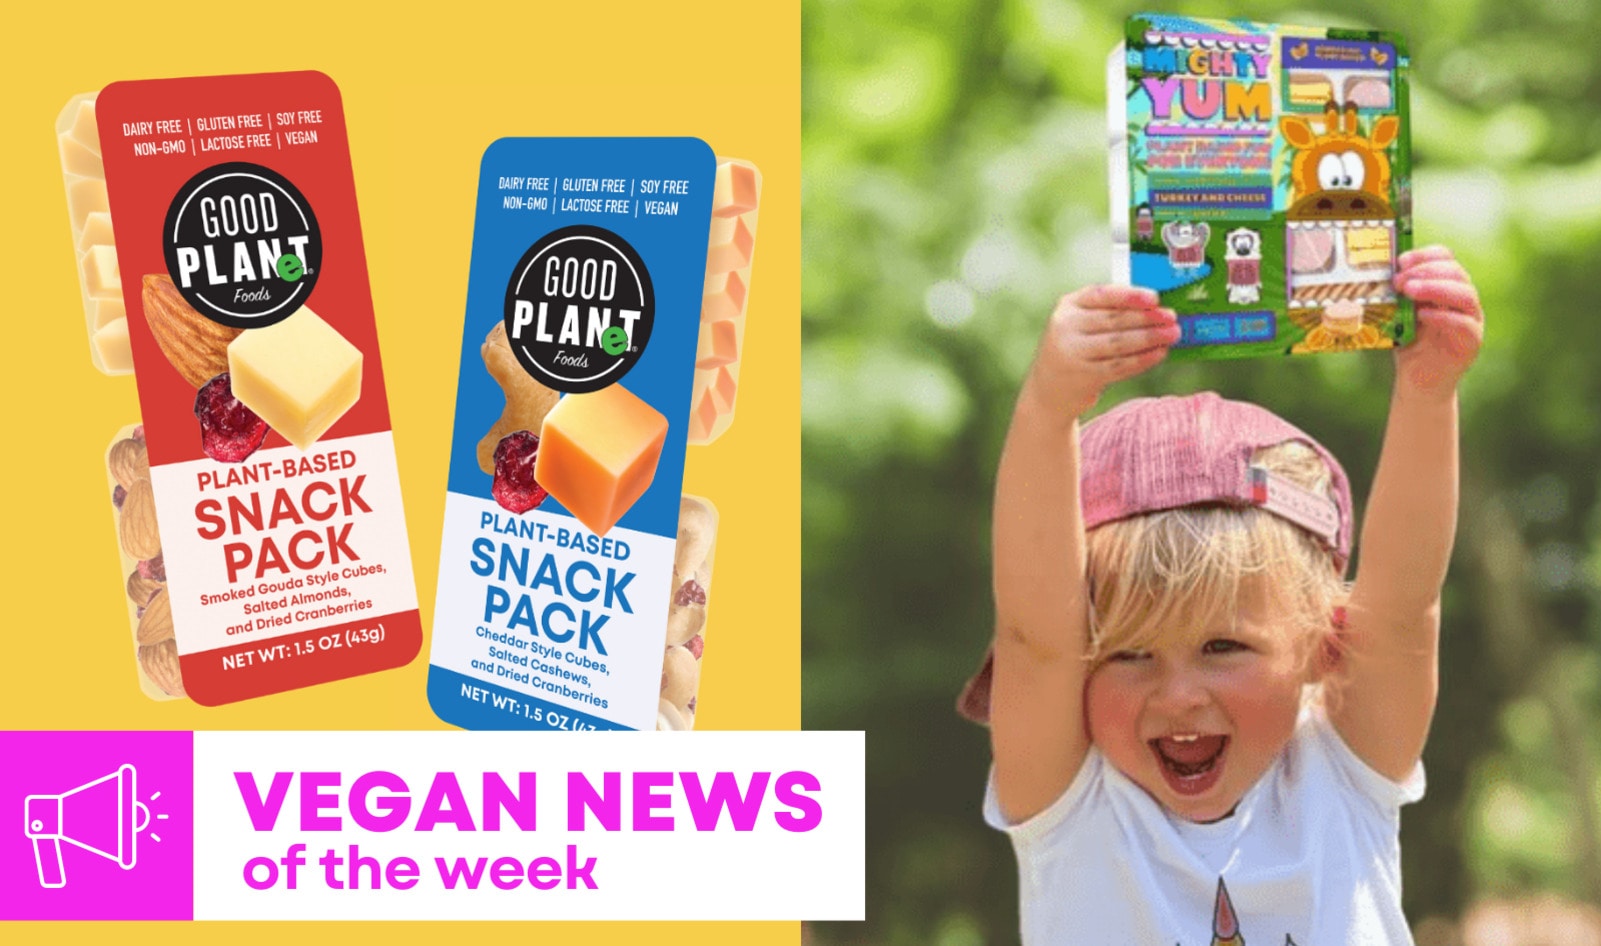 Cheese Snack Packs, Lunchables, and More Vegan Food News of the Week